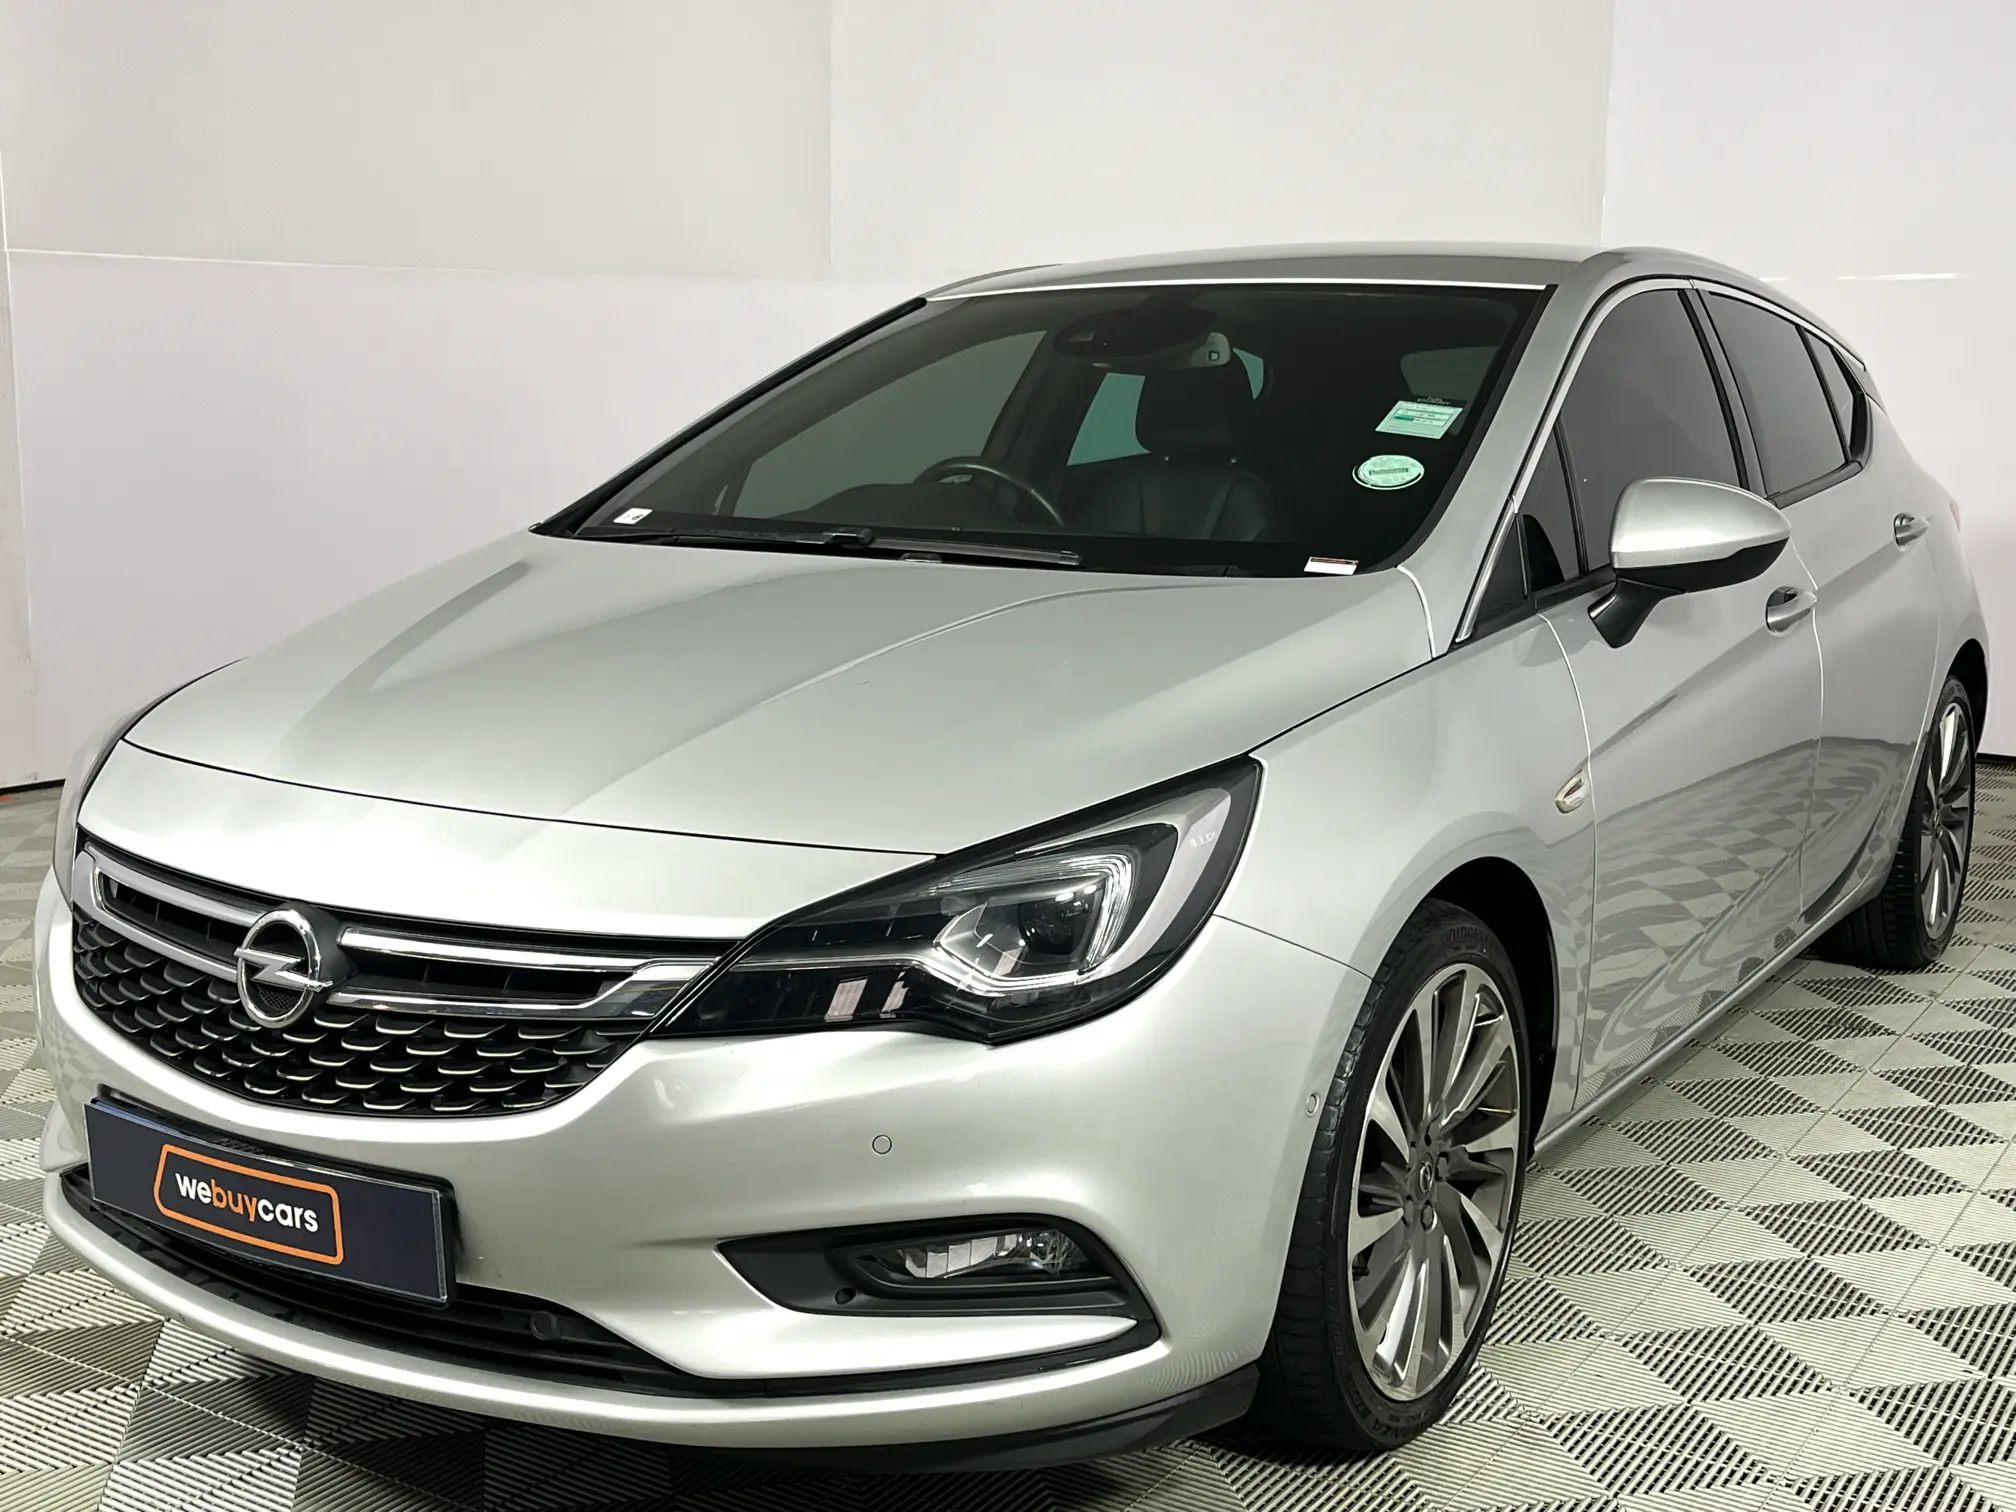 2019 Opel Astra 1.6T Sport Auto (5dr)